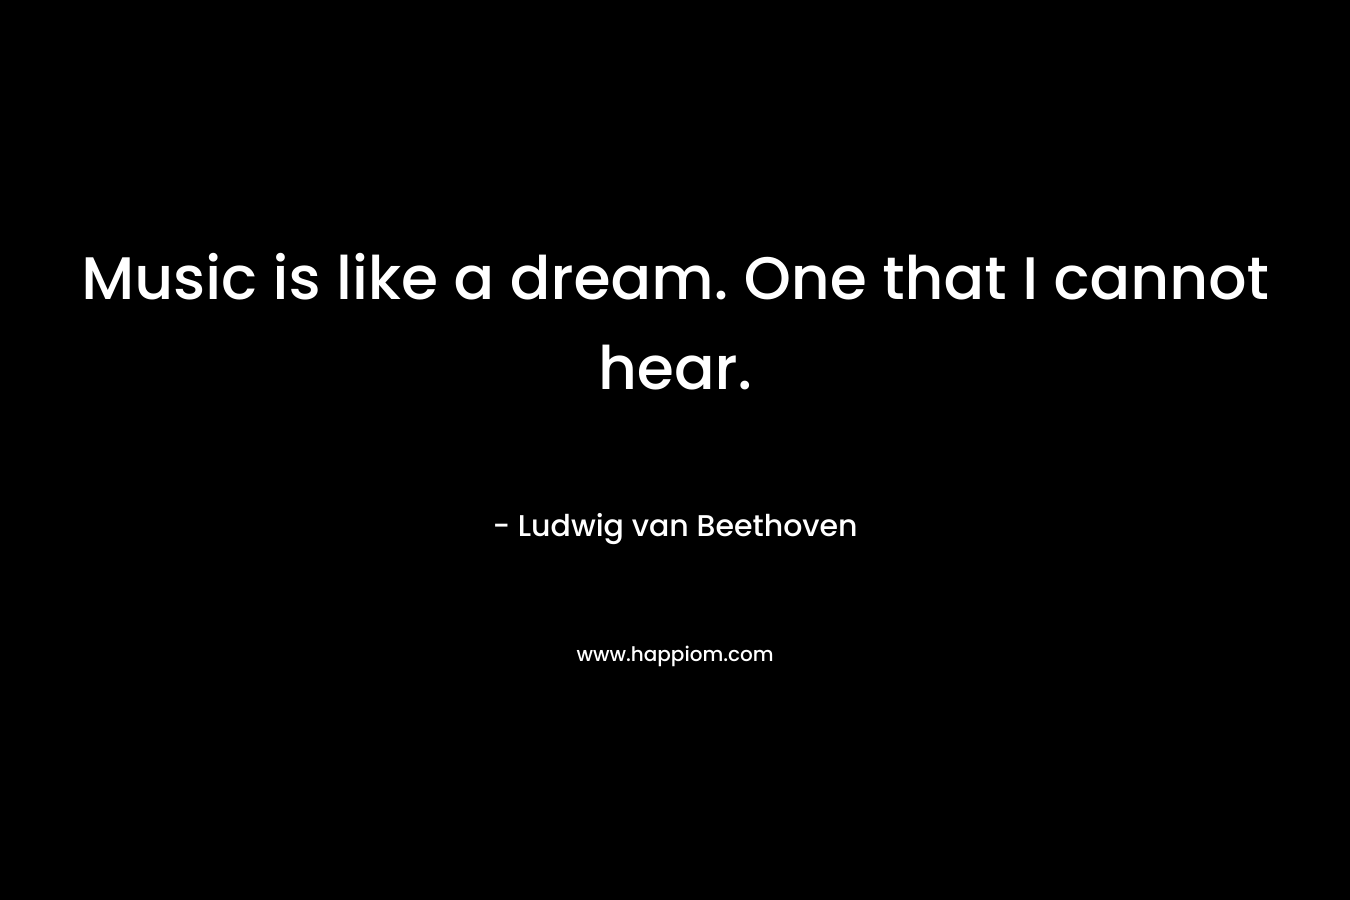 Music is like a dream. One that I cannot hear.